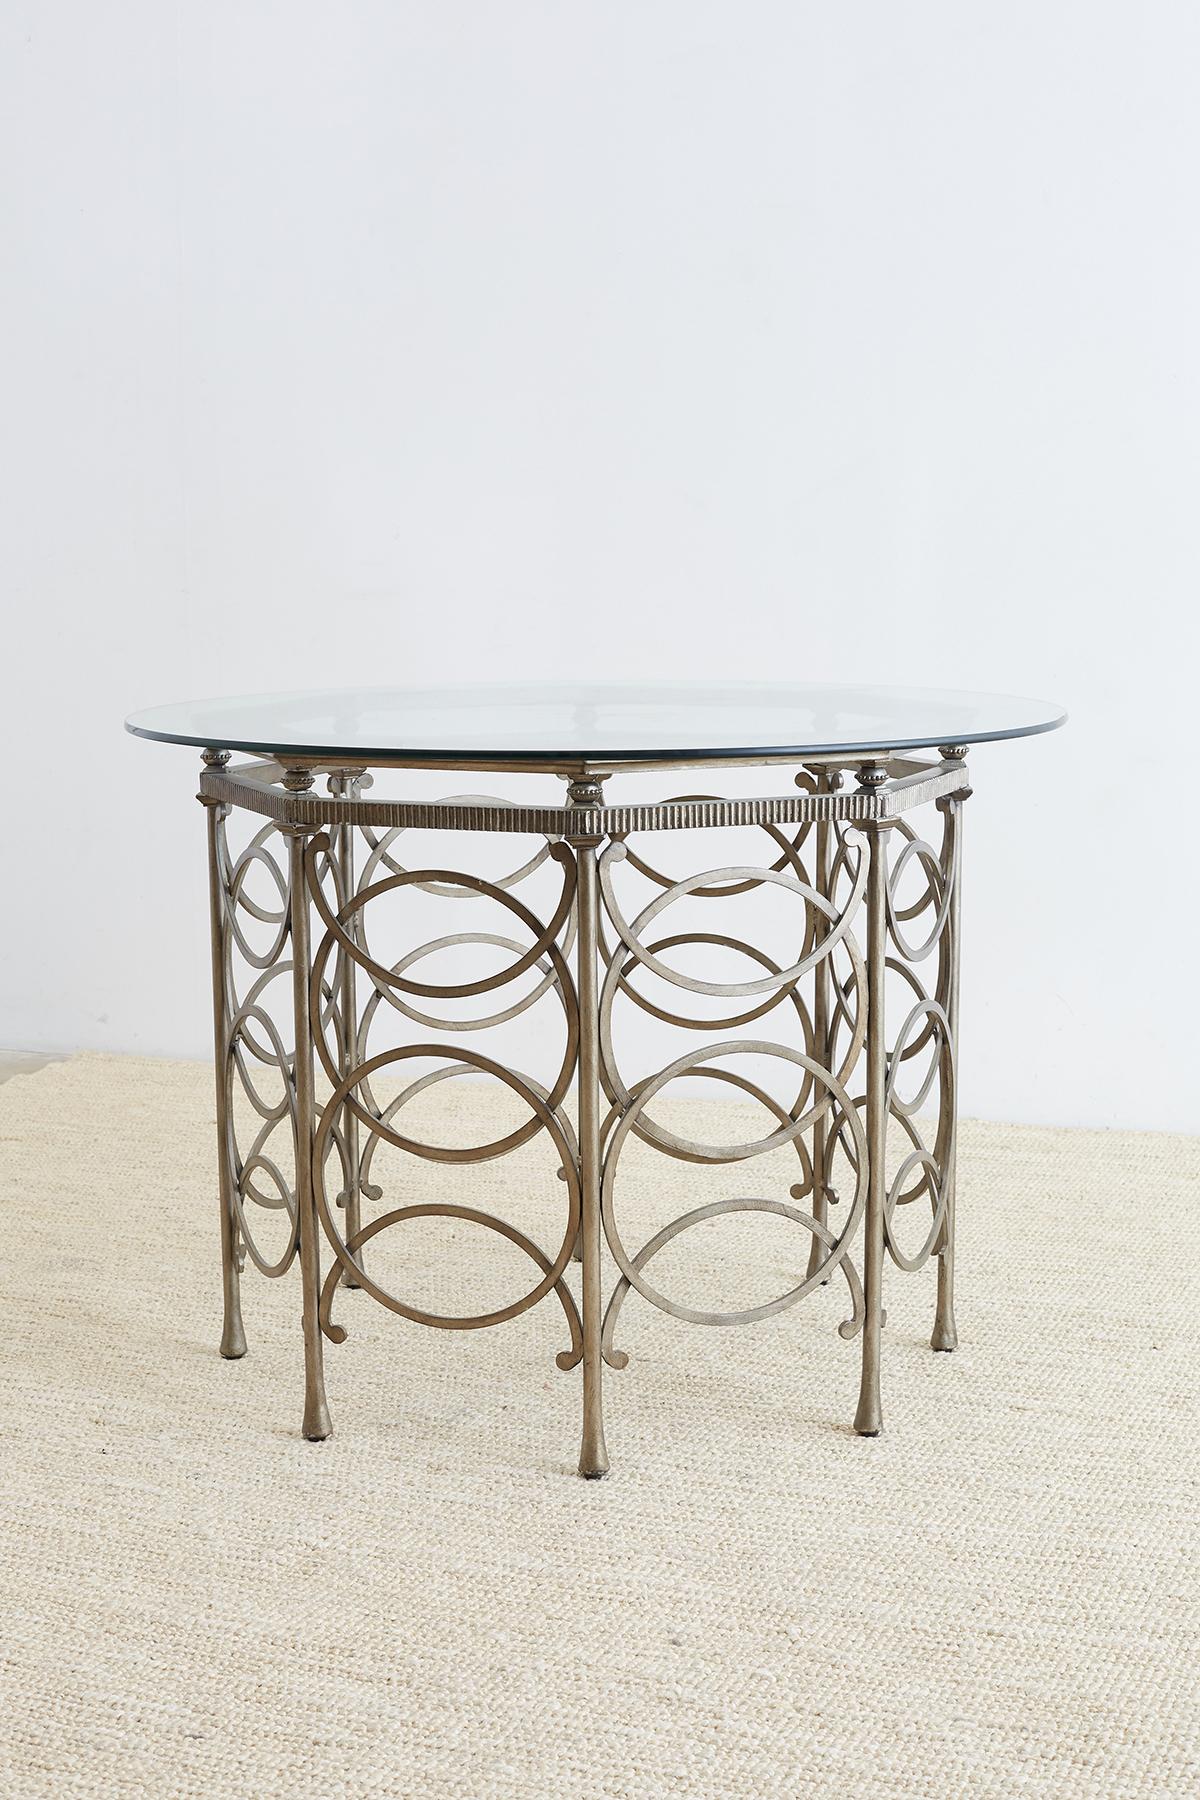 Exceptional round silver metal base dining table or center table decorated in the neoclassical taste. Features an octagonal metal base with eight legs accented with rings and demilune motifs. Each thick column leg connects to a reeded stretcher